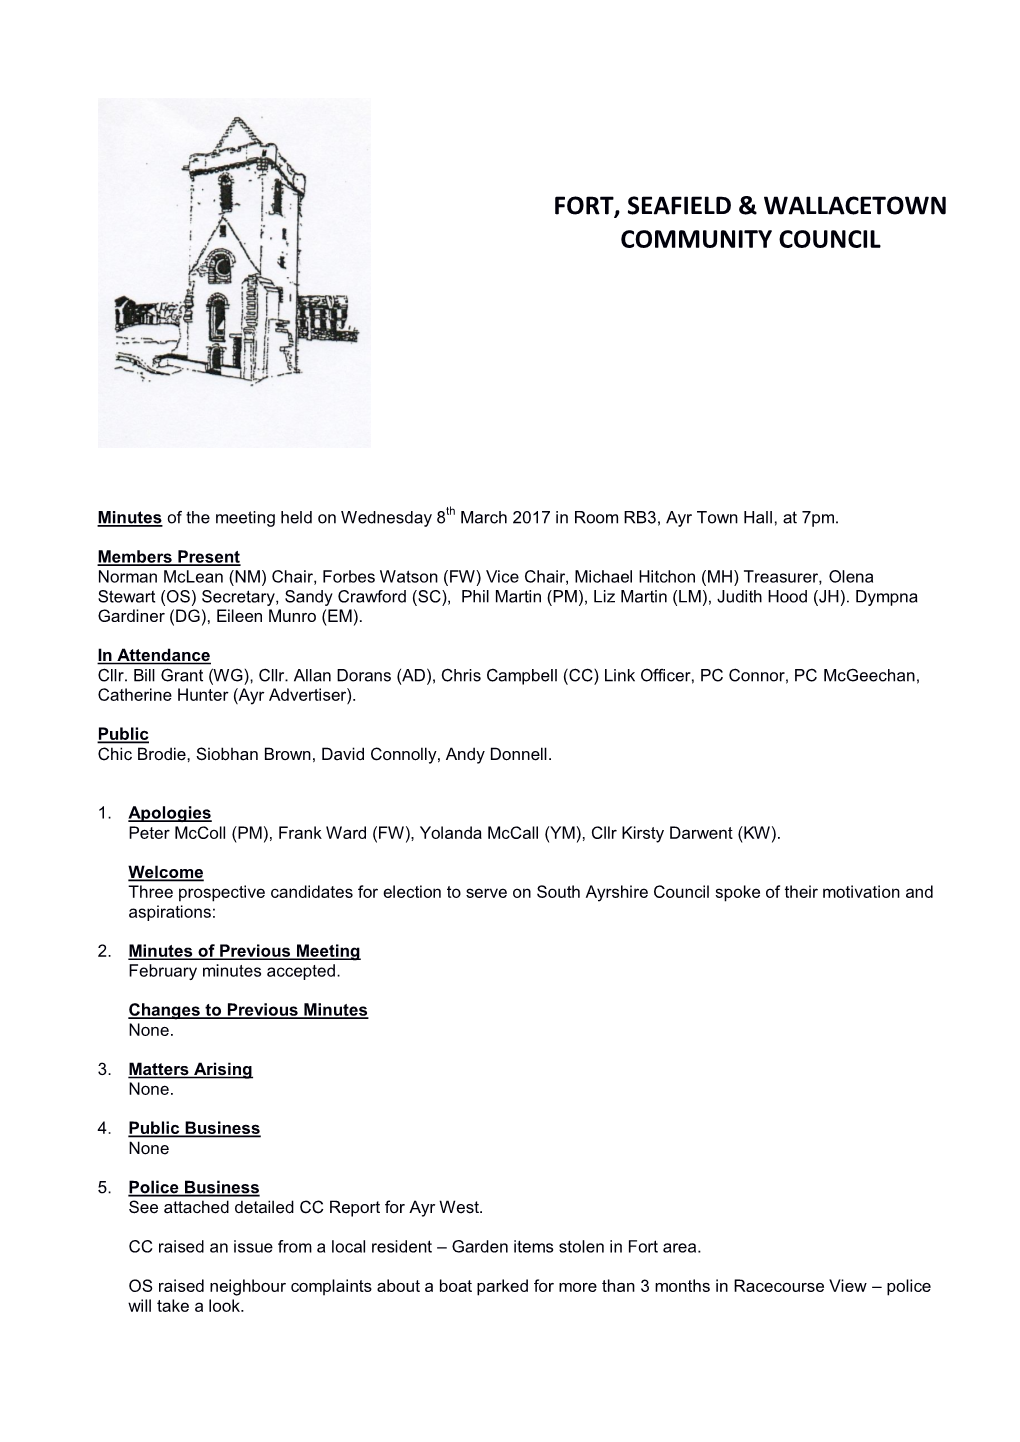 Fort, Seafield & Wallacetown Community Council